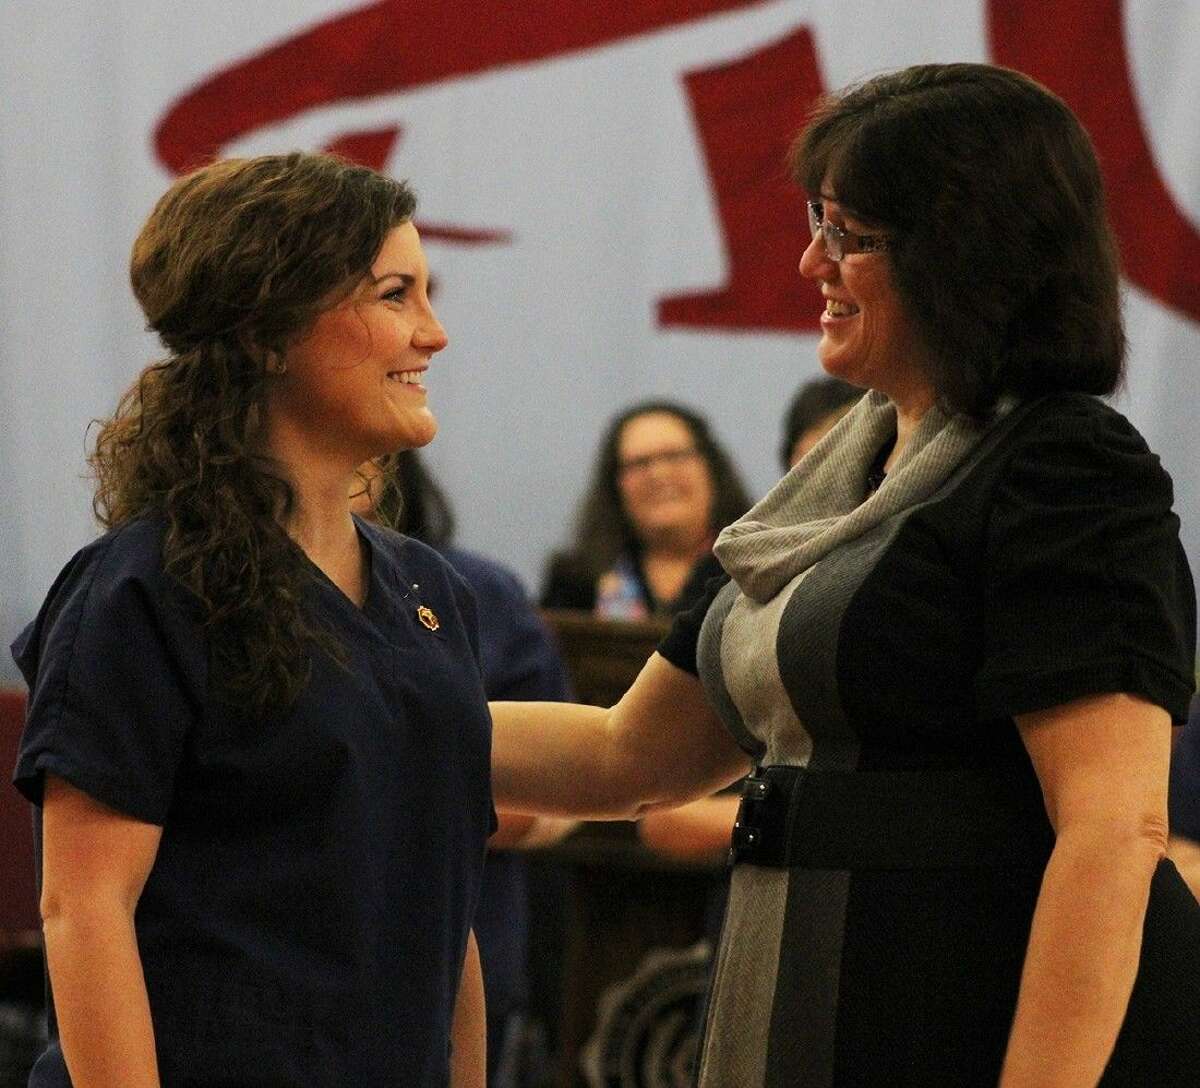 ACC Nursing student Brooklyn Wilson, of League City, left smiles after receiving her nurse’s pin from Nursing Director Dr. Debbi Fontenot during a ceremony on December 12.